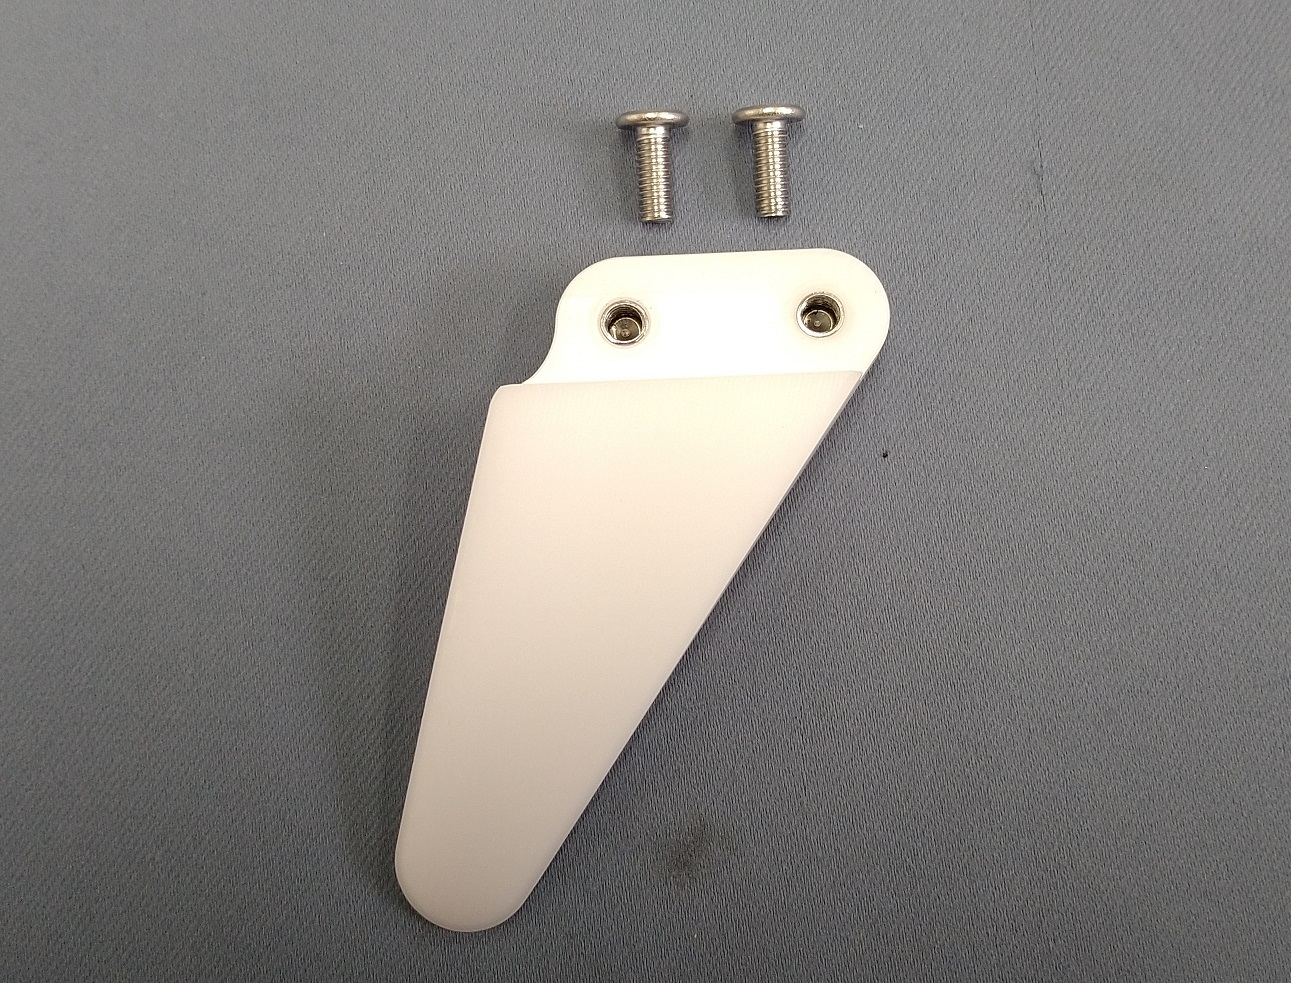 2020~CBR1000RR-R stand hook guide R